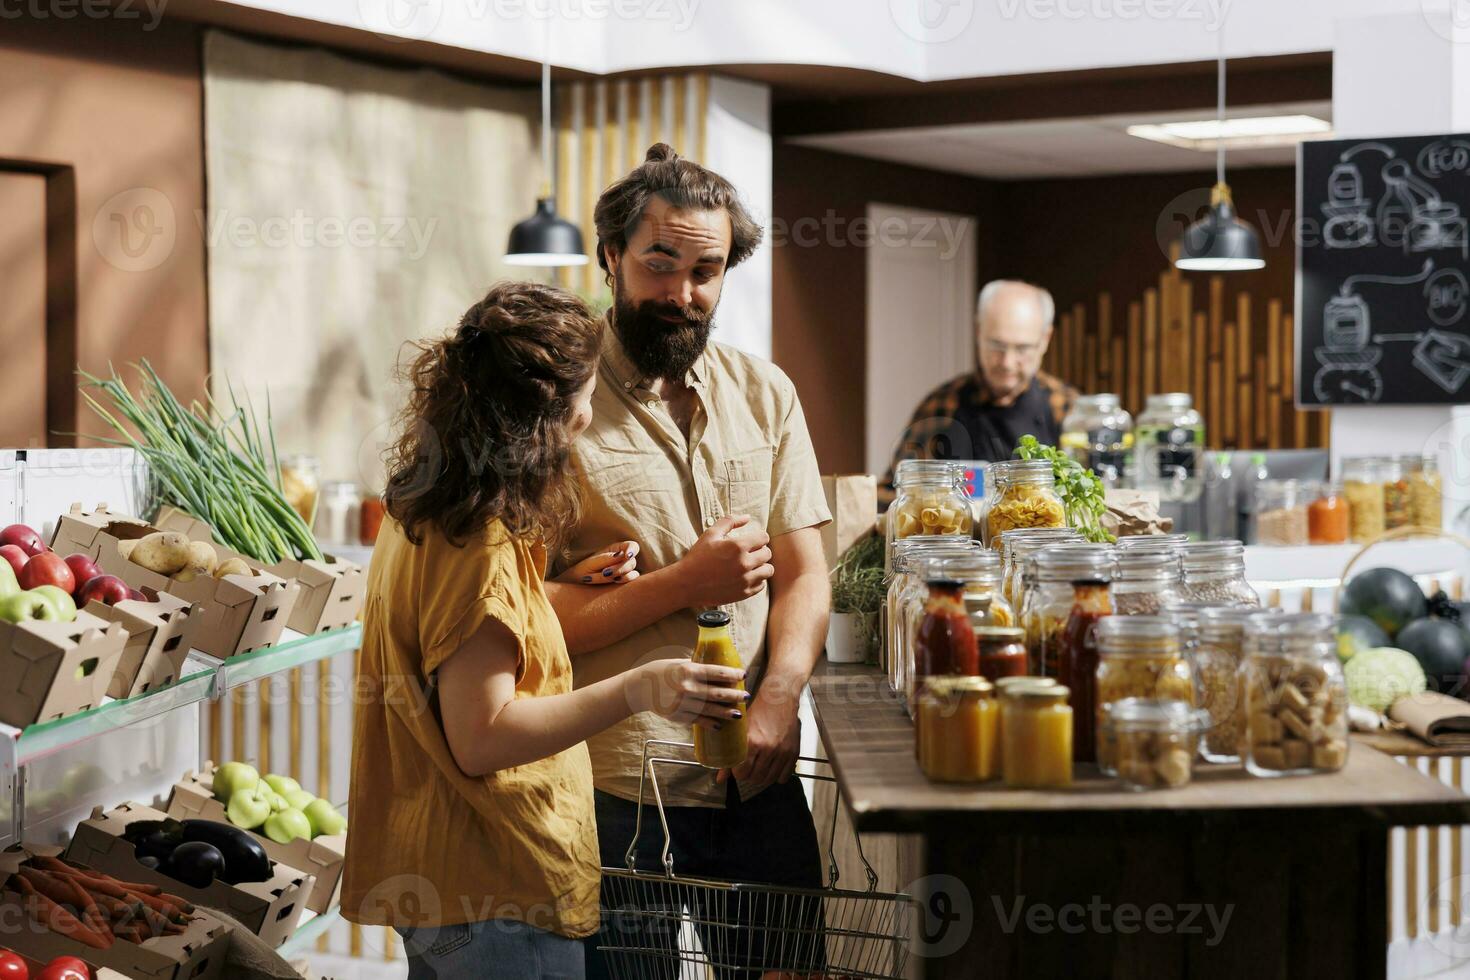 Green living couple shopping in zero waste supermarket, happy to find organic food. Vegan customers preparing for winter, purchasing pantry staples from eco friendly local neighborhood store photo